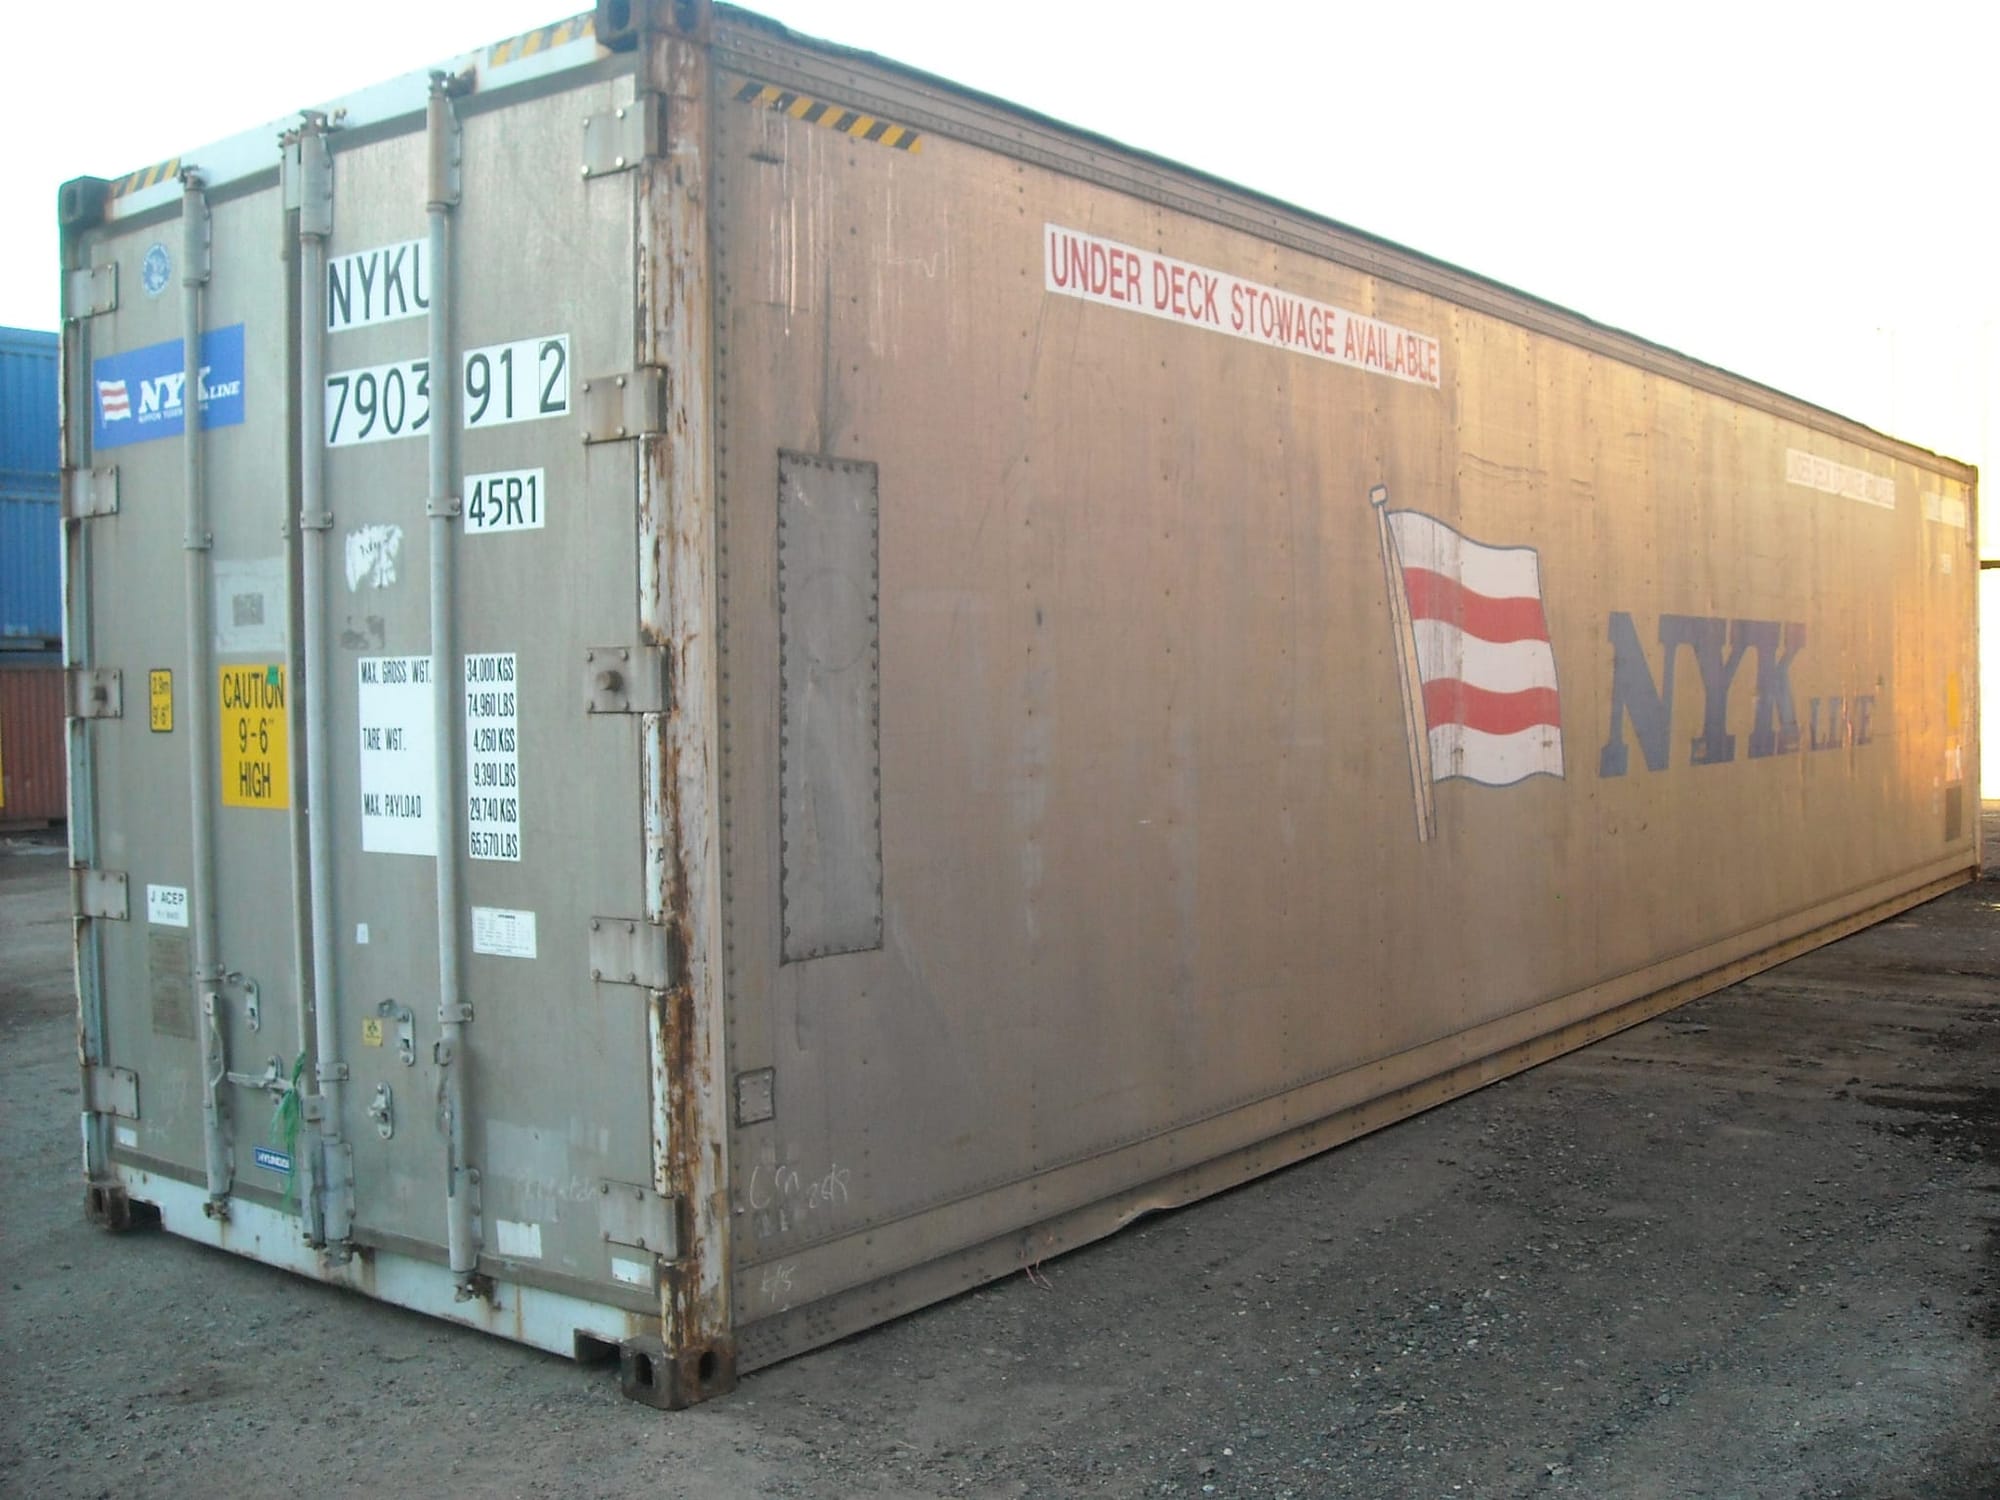 TRS sells and rents 20ft and 40ft refrigeration containers